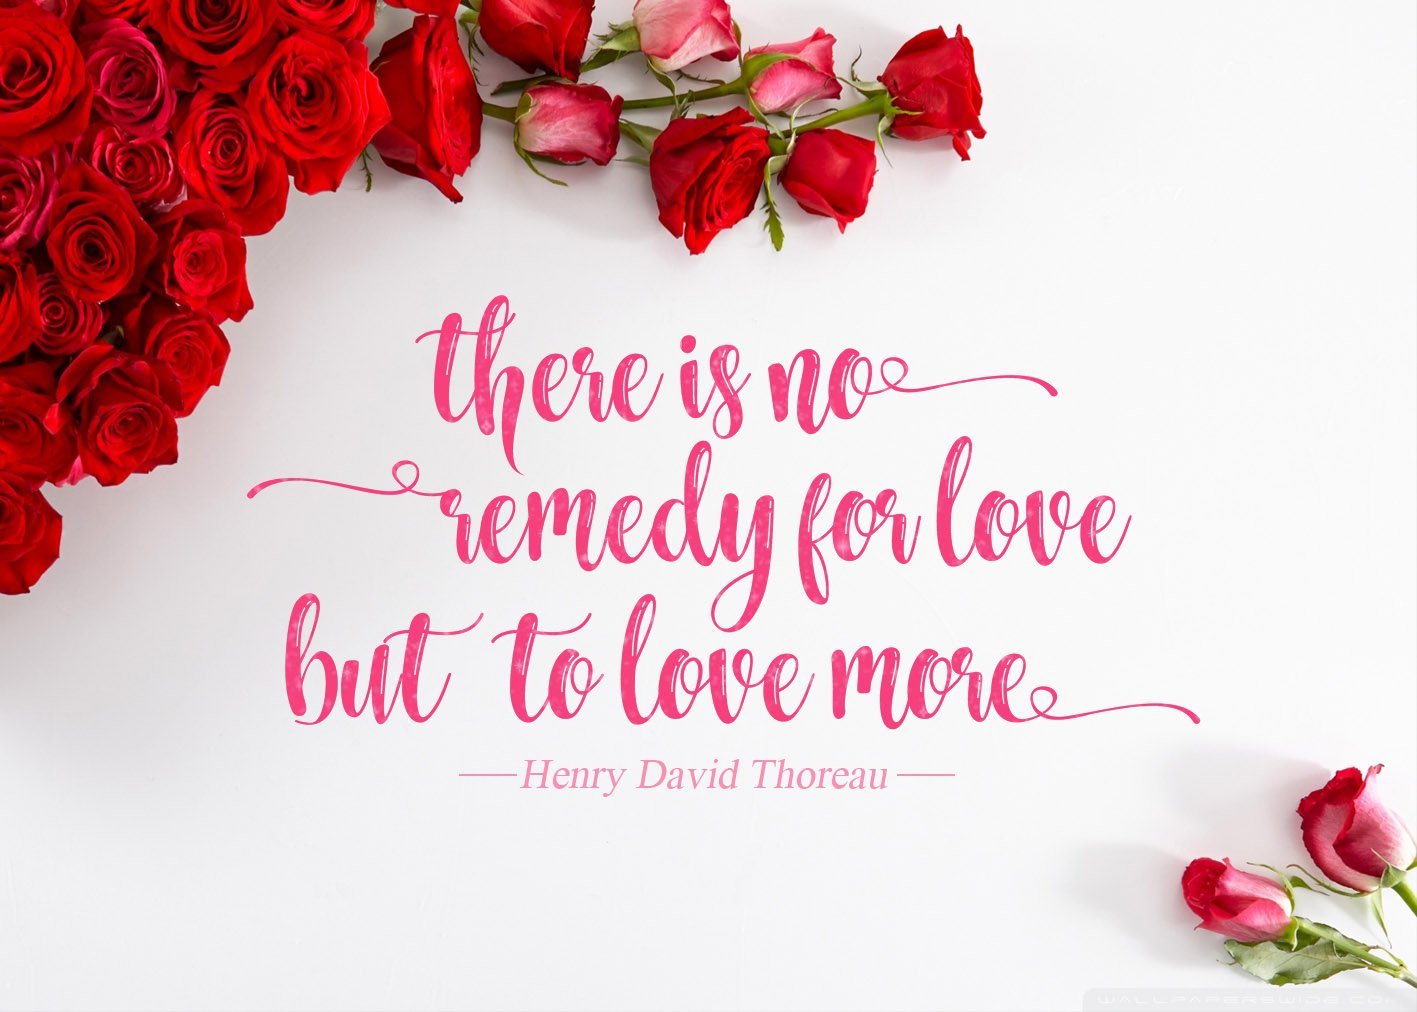 This large bouquet of roses and an inscription are just made for romantic evenings.